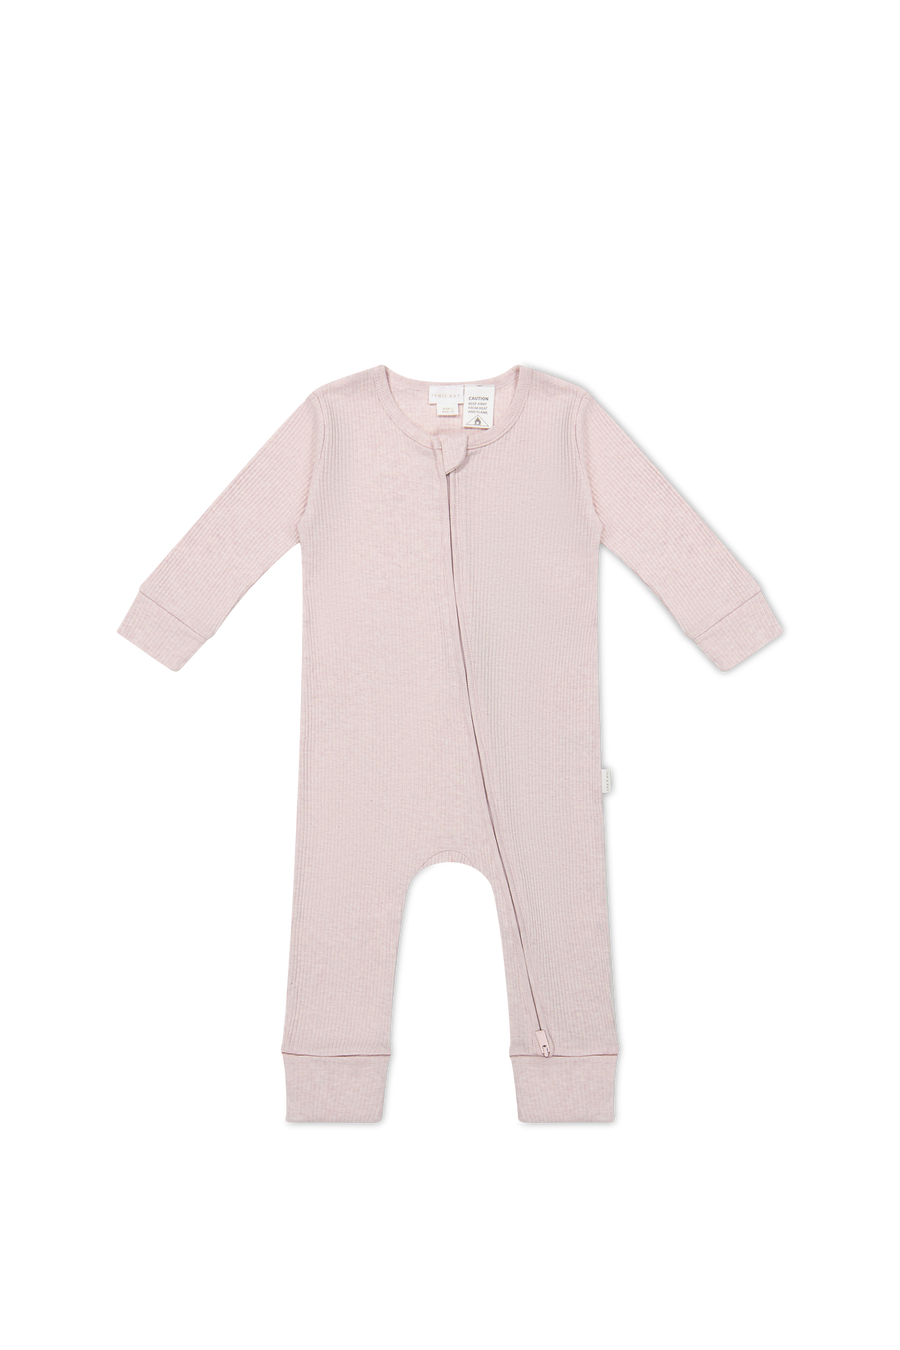 Organic Cotton Modal Frankie Onepiece - Violet Marle Childrens Onepiece from Jamie Kay USA